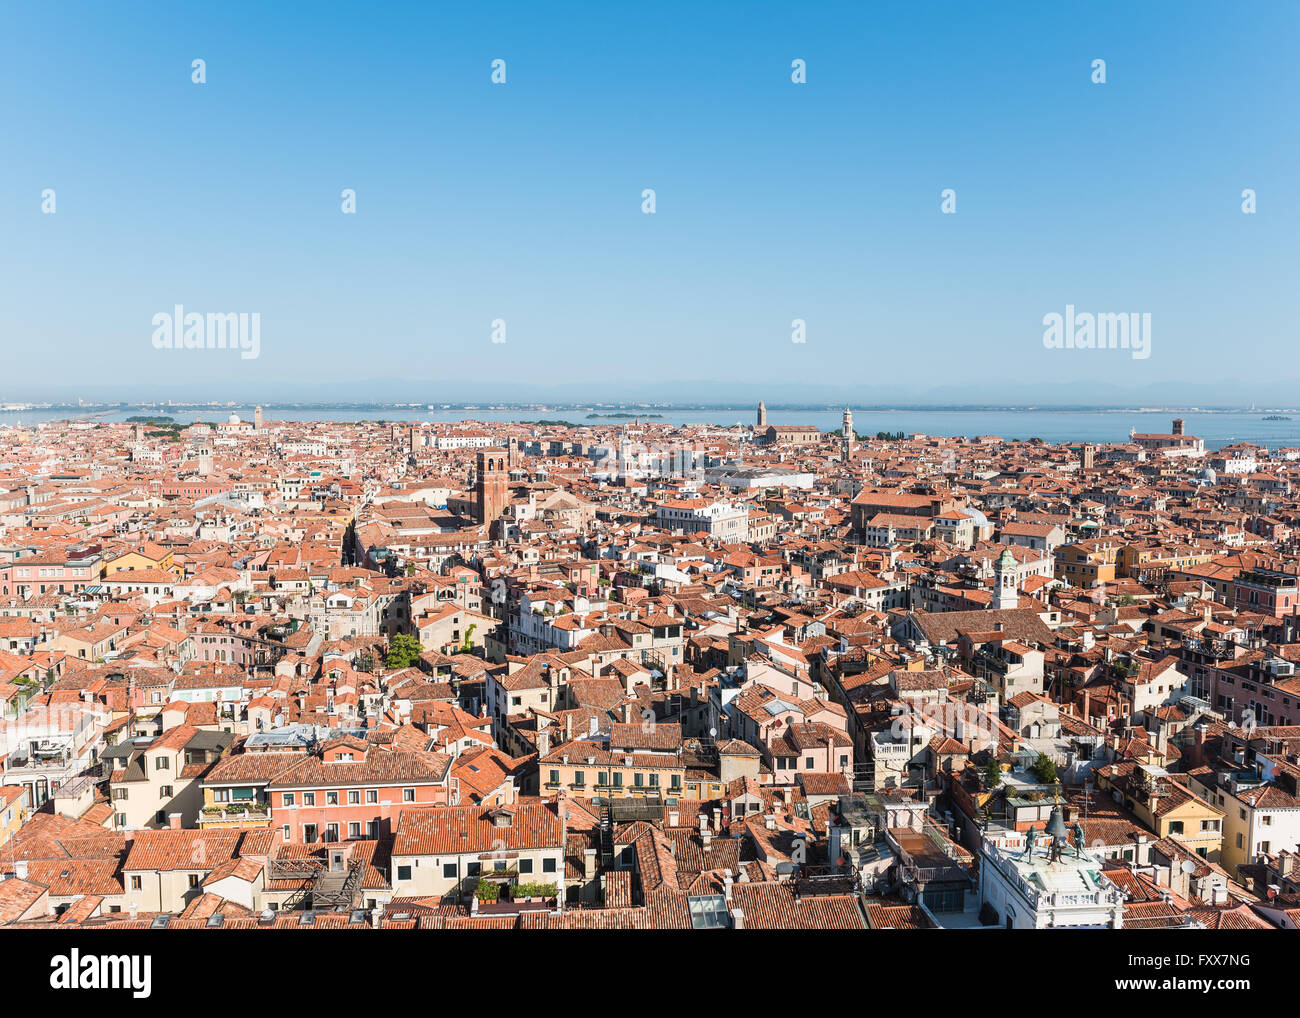 Landscape image of Venice, Italy from an above perspective. Stock Photo